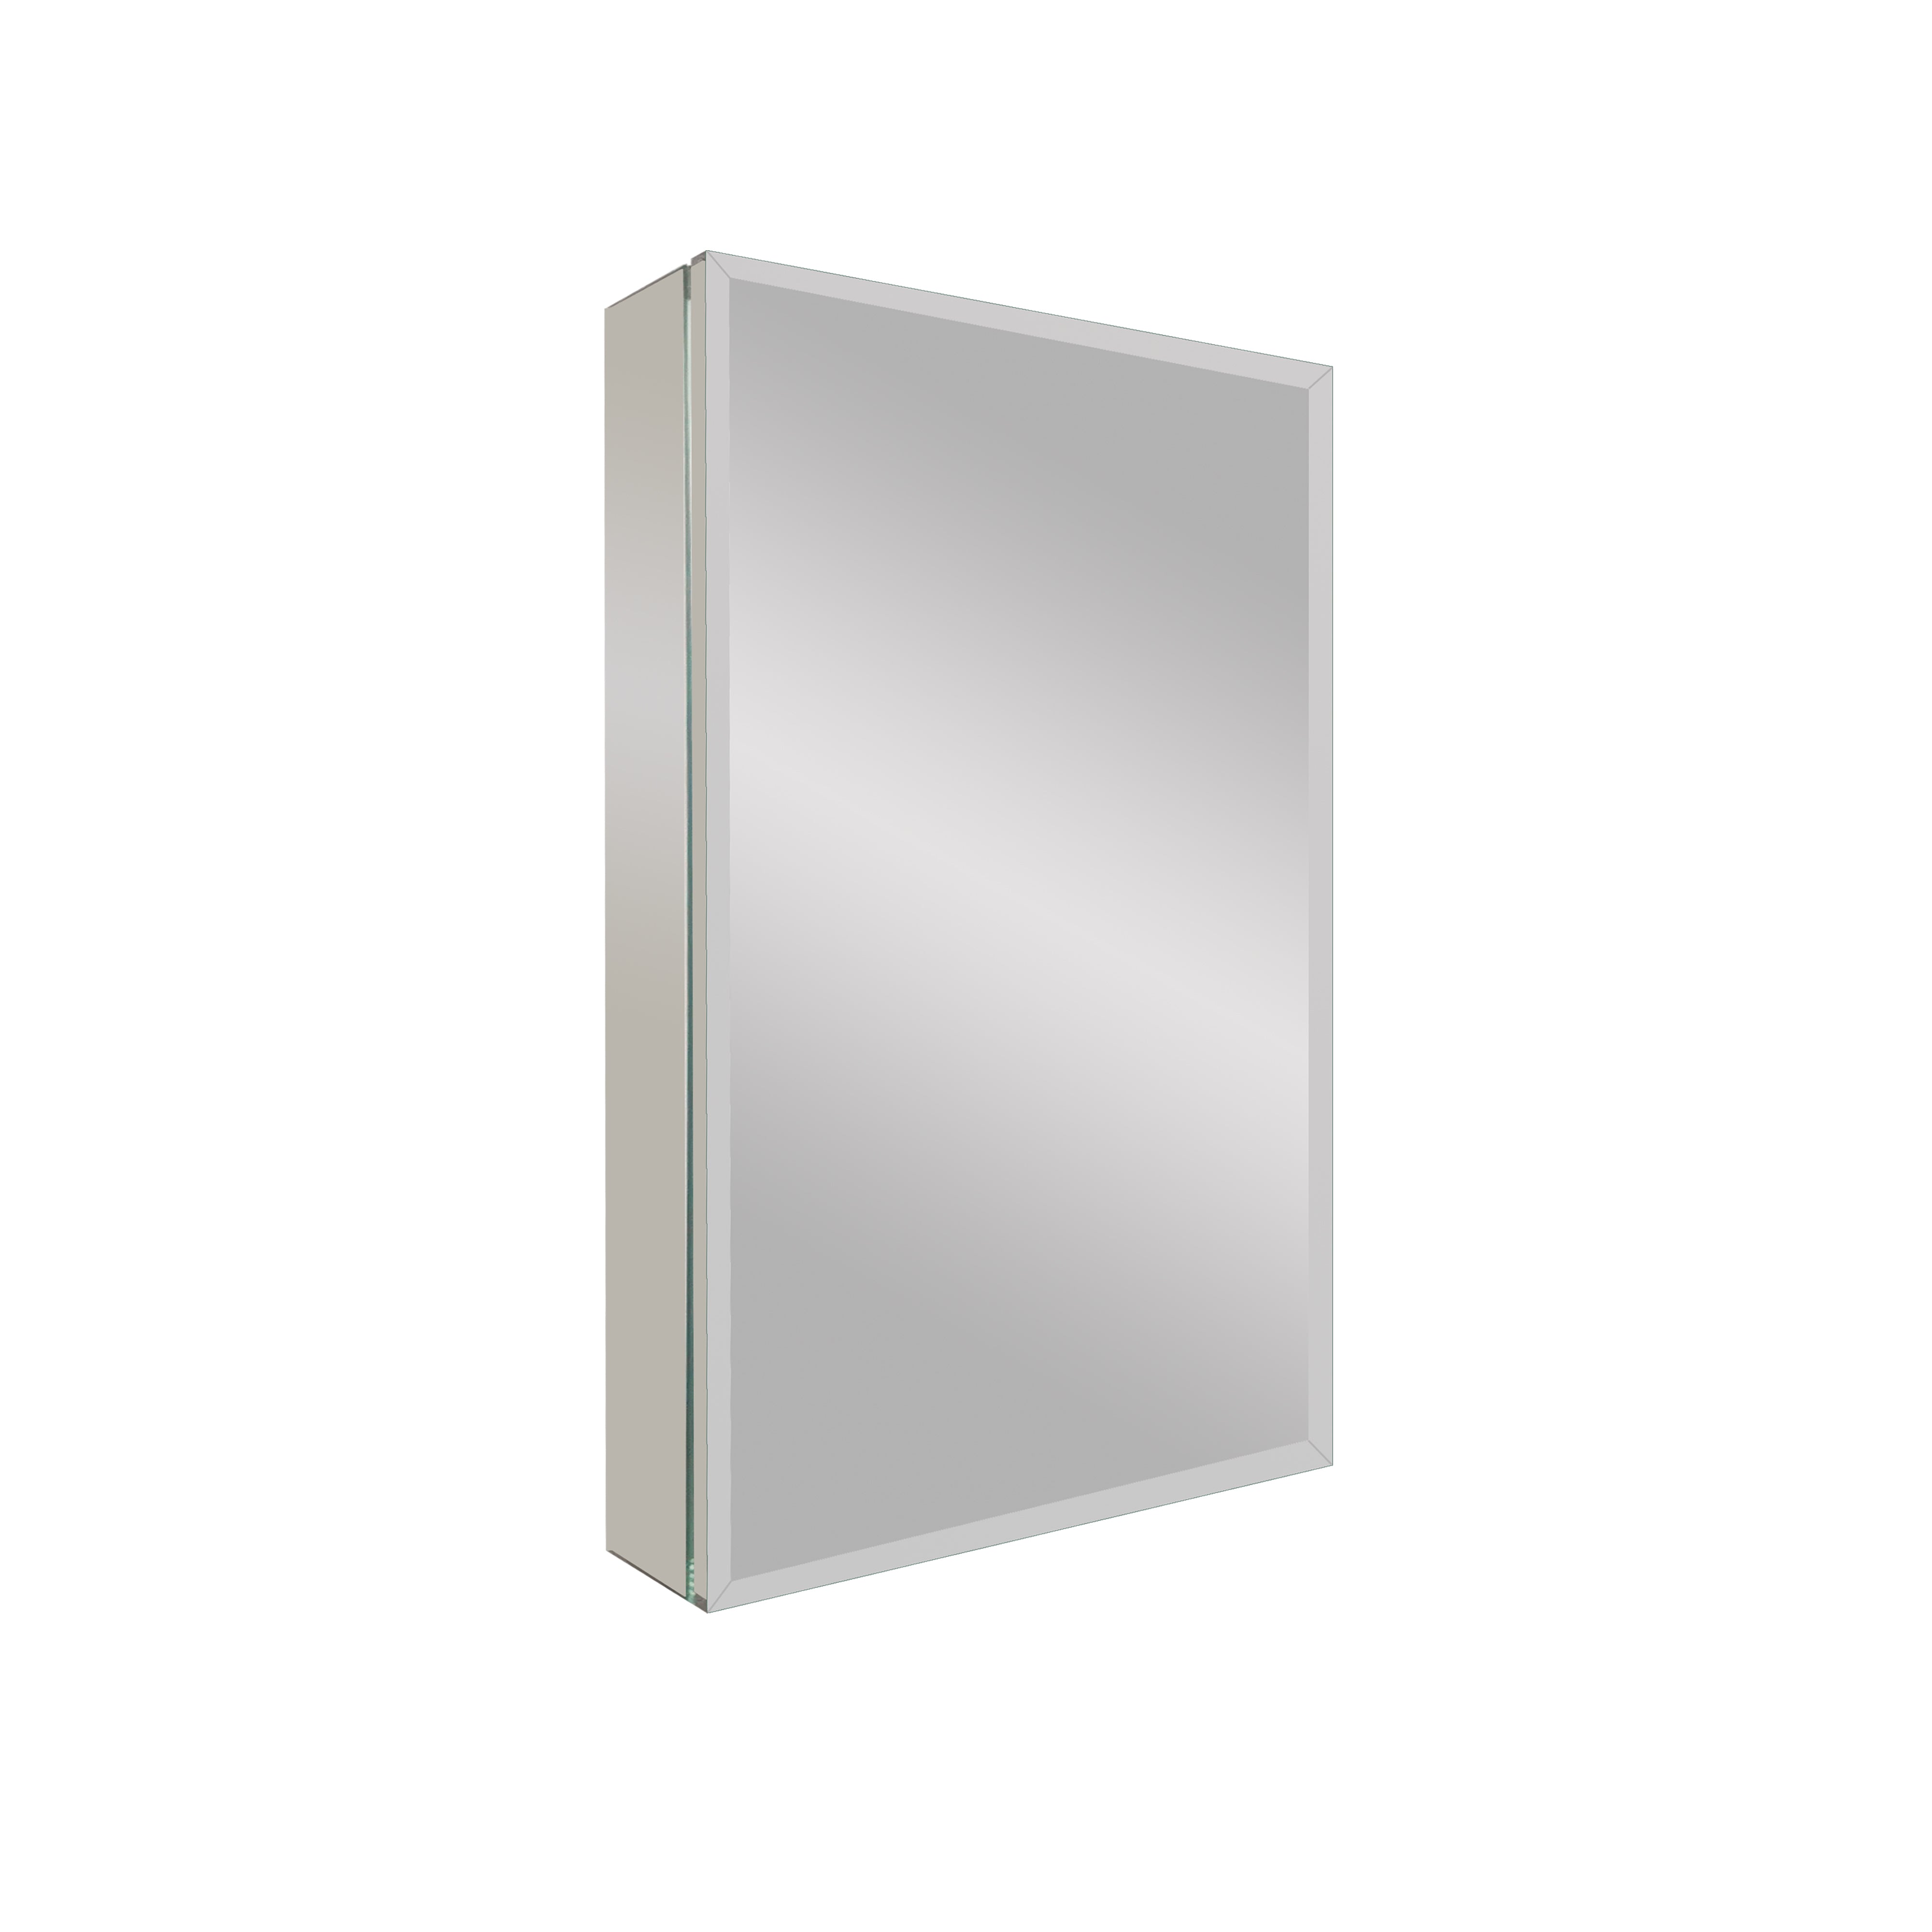 Stylish and Functional 15x26 Inches Bathroom Medicine Cabinet - Adjustable Shelves, Soft-Closing Hinges, and a Sleek Mirror Design for a Chic Bathroom Upgrade - Eco LED Lightings 